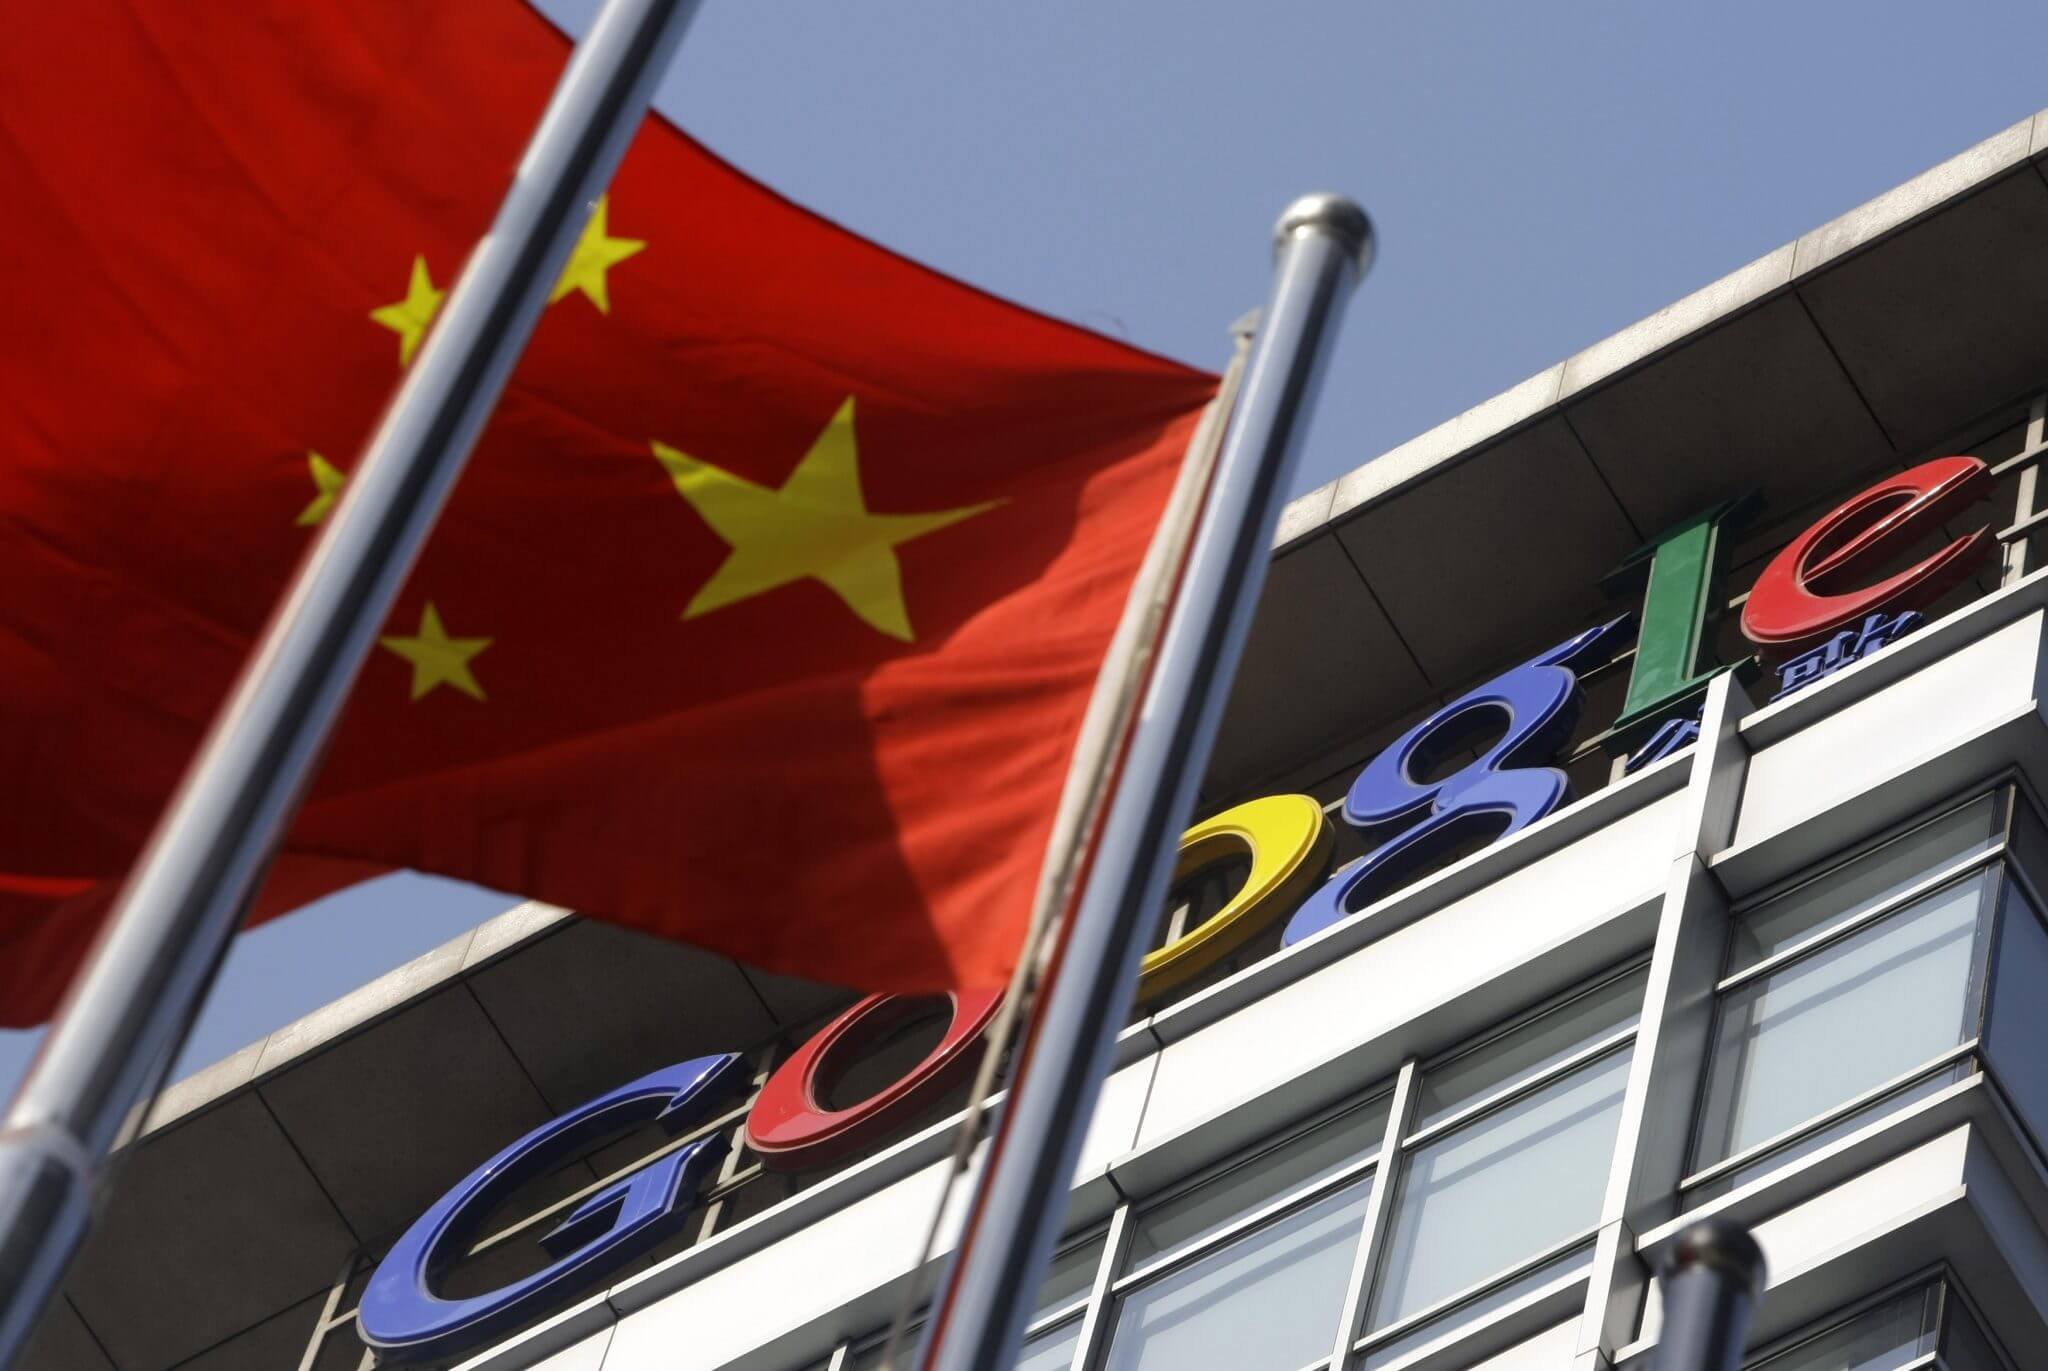 Google denies that it's continued work on a censored search engine for China